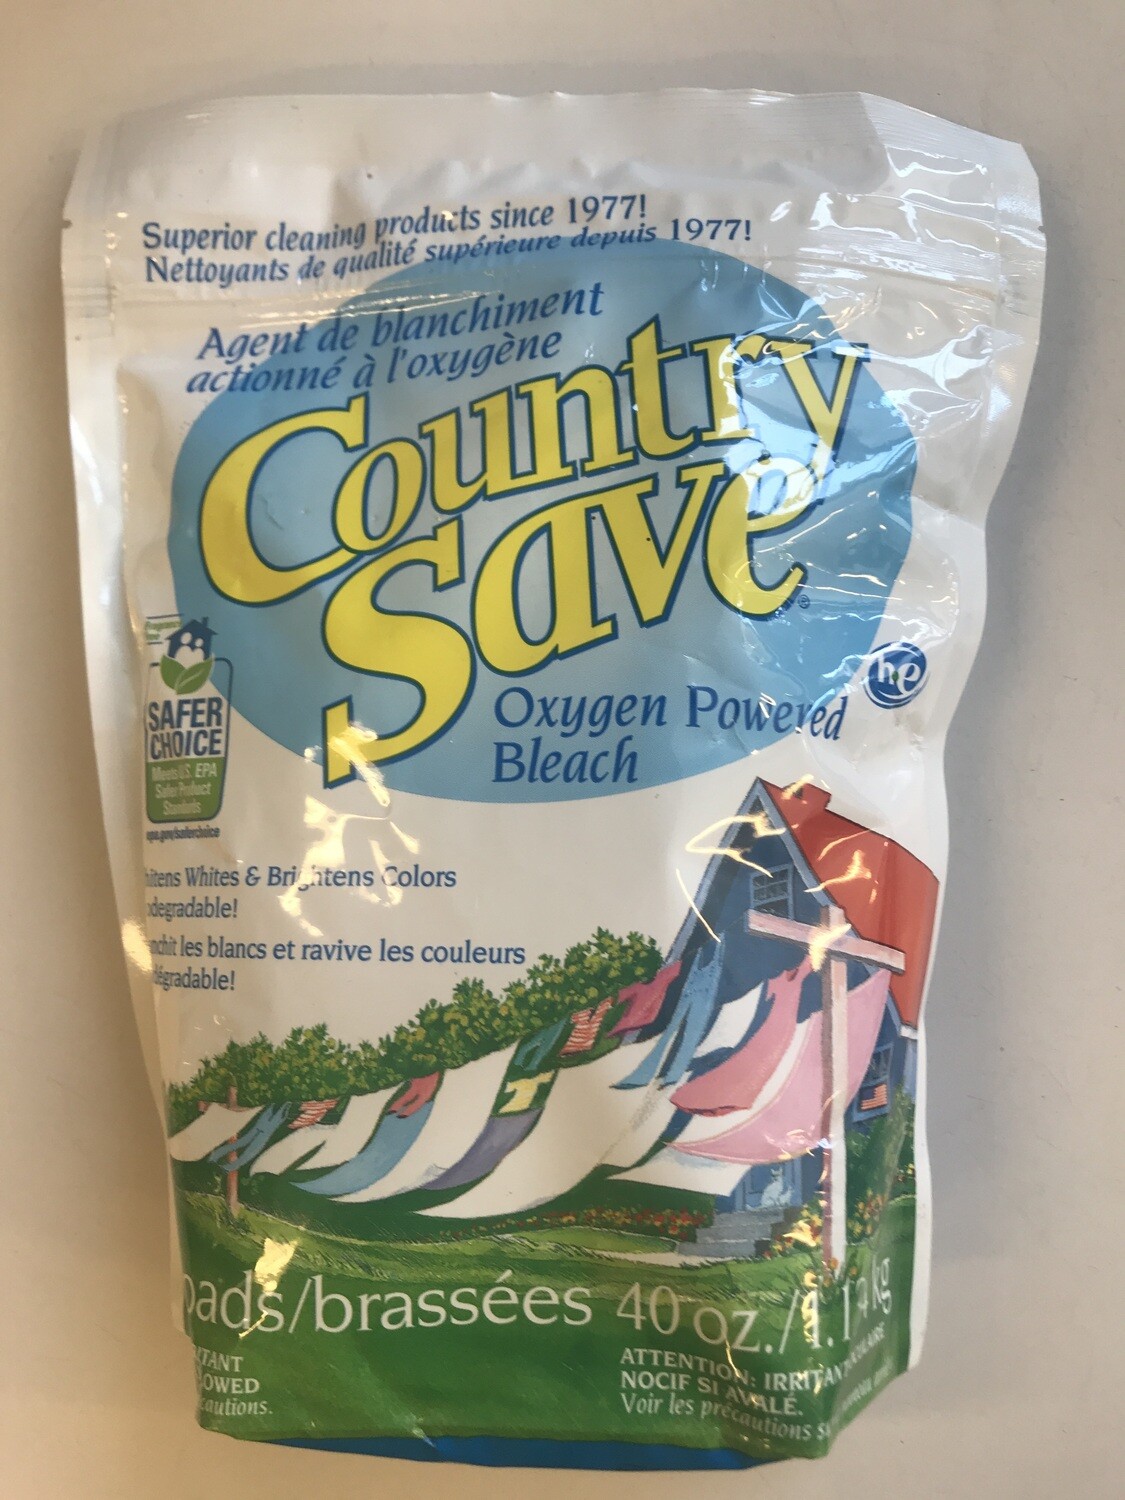 Household / Laundry / Country Save Oxy Powder Bleach